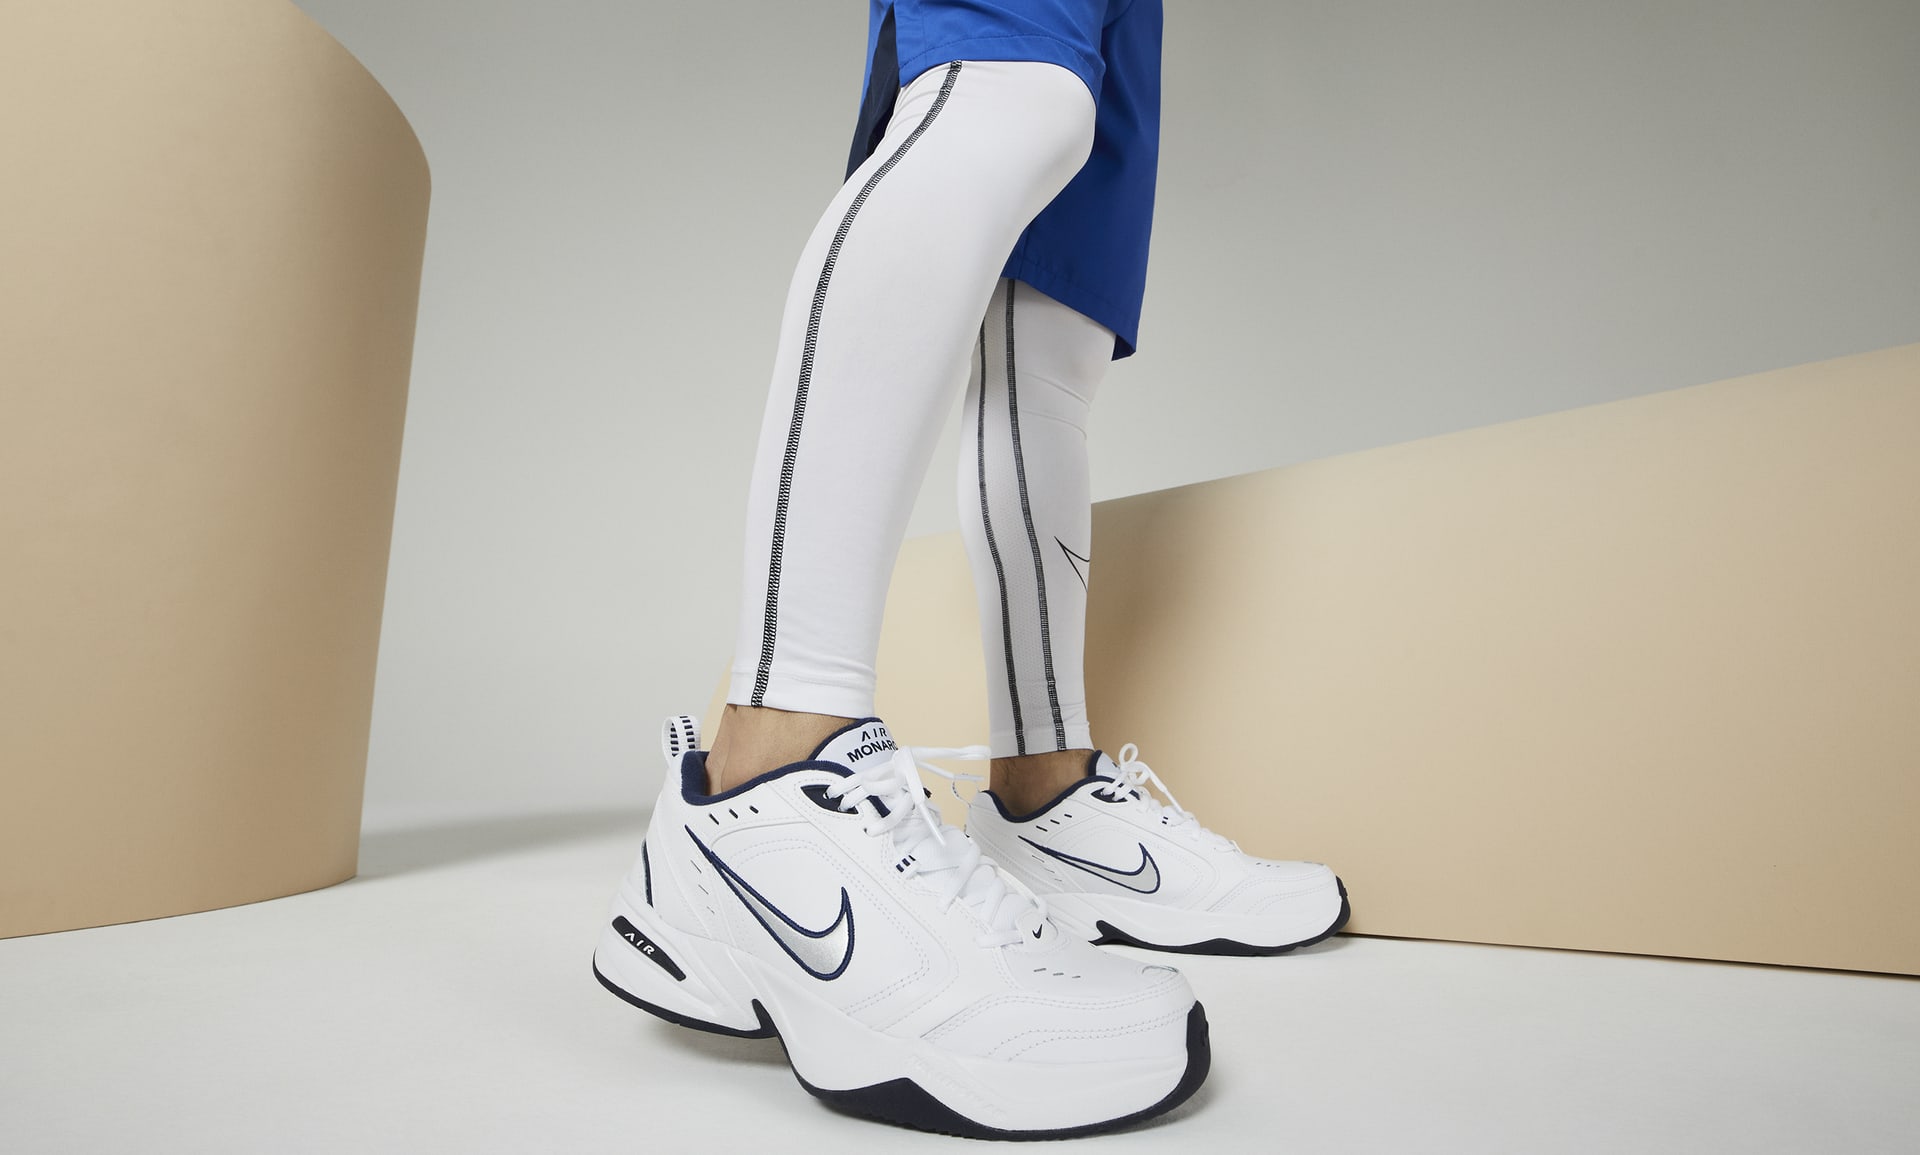 Nike Air Monarch IV Review: The Shoe That Has Fitness Gurus and Athletes Raving!